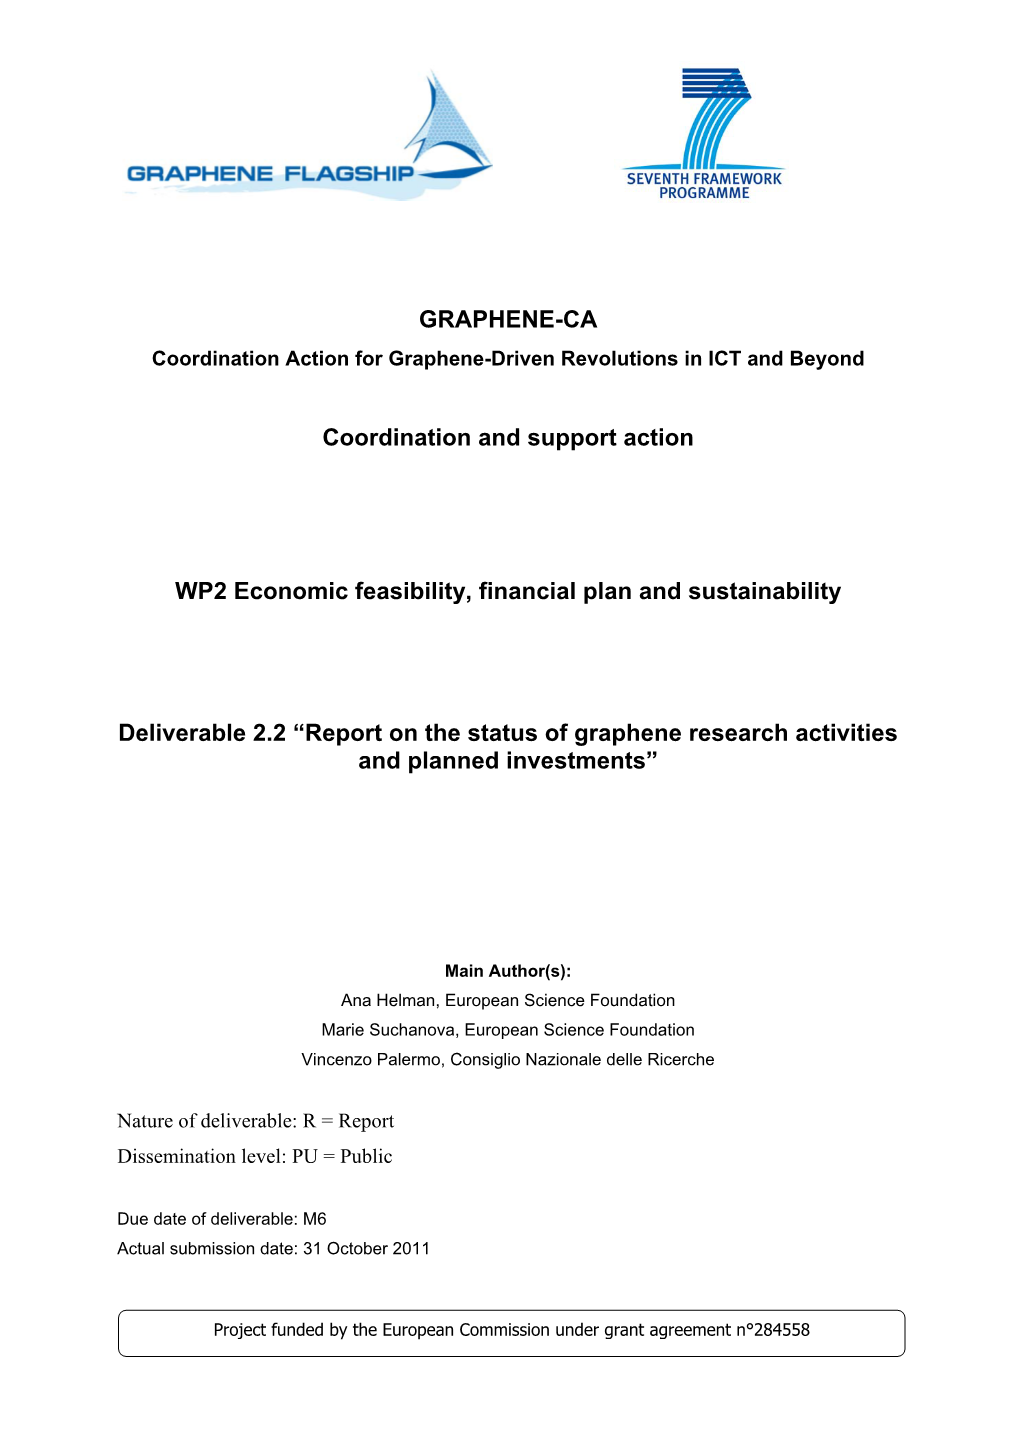 GRAPHENE-CA Coordination and Support Action WP2 Economic